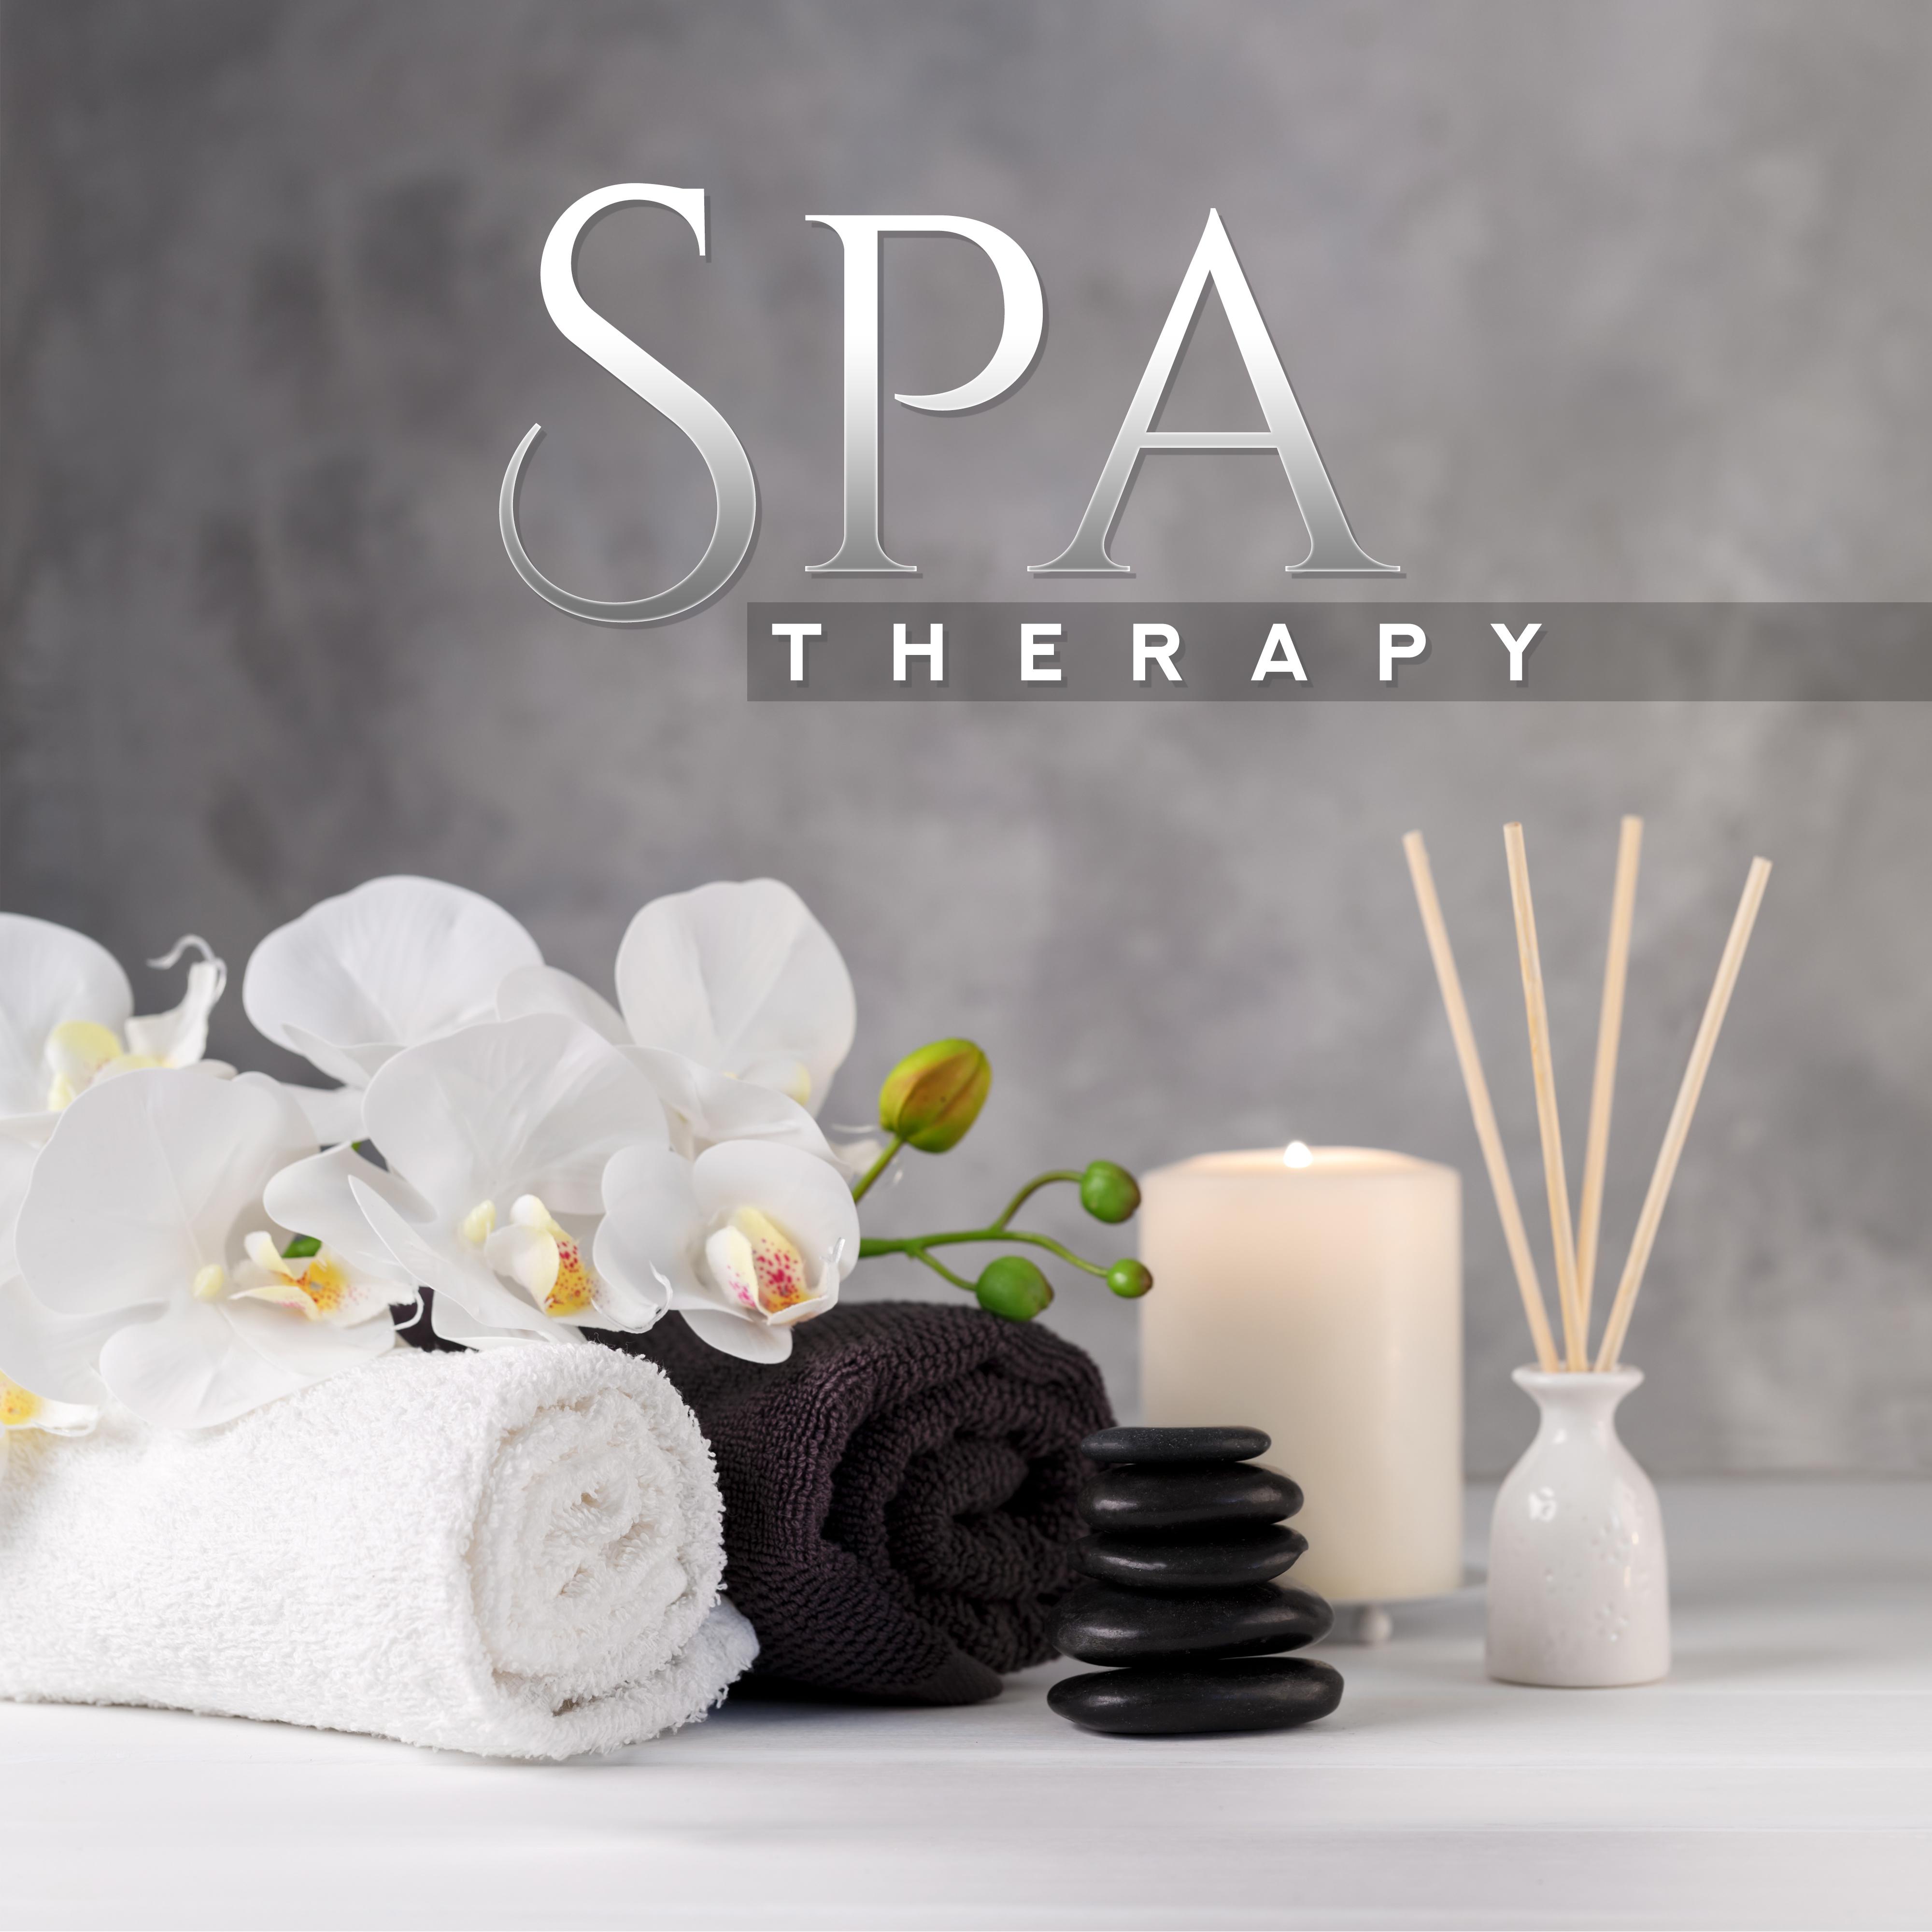 Spa Therapy  Relaxing Sounds for Massage, Wellness, Rest, Sleep, Spiritual Harmony, Deep Relaxation, Soothing Sounds, Relaxing Music Therapy, Spa Zen